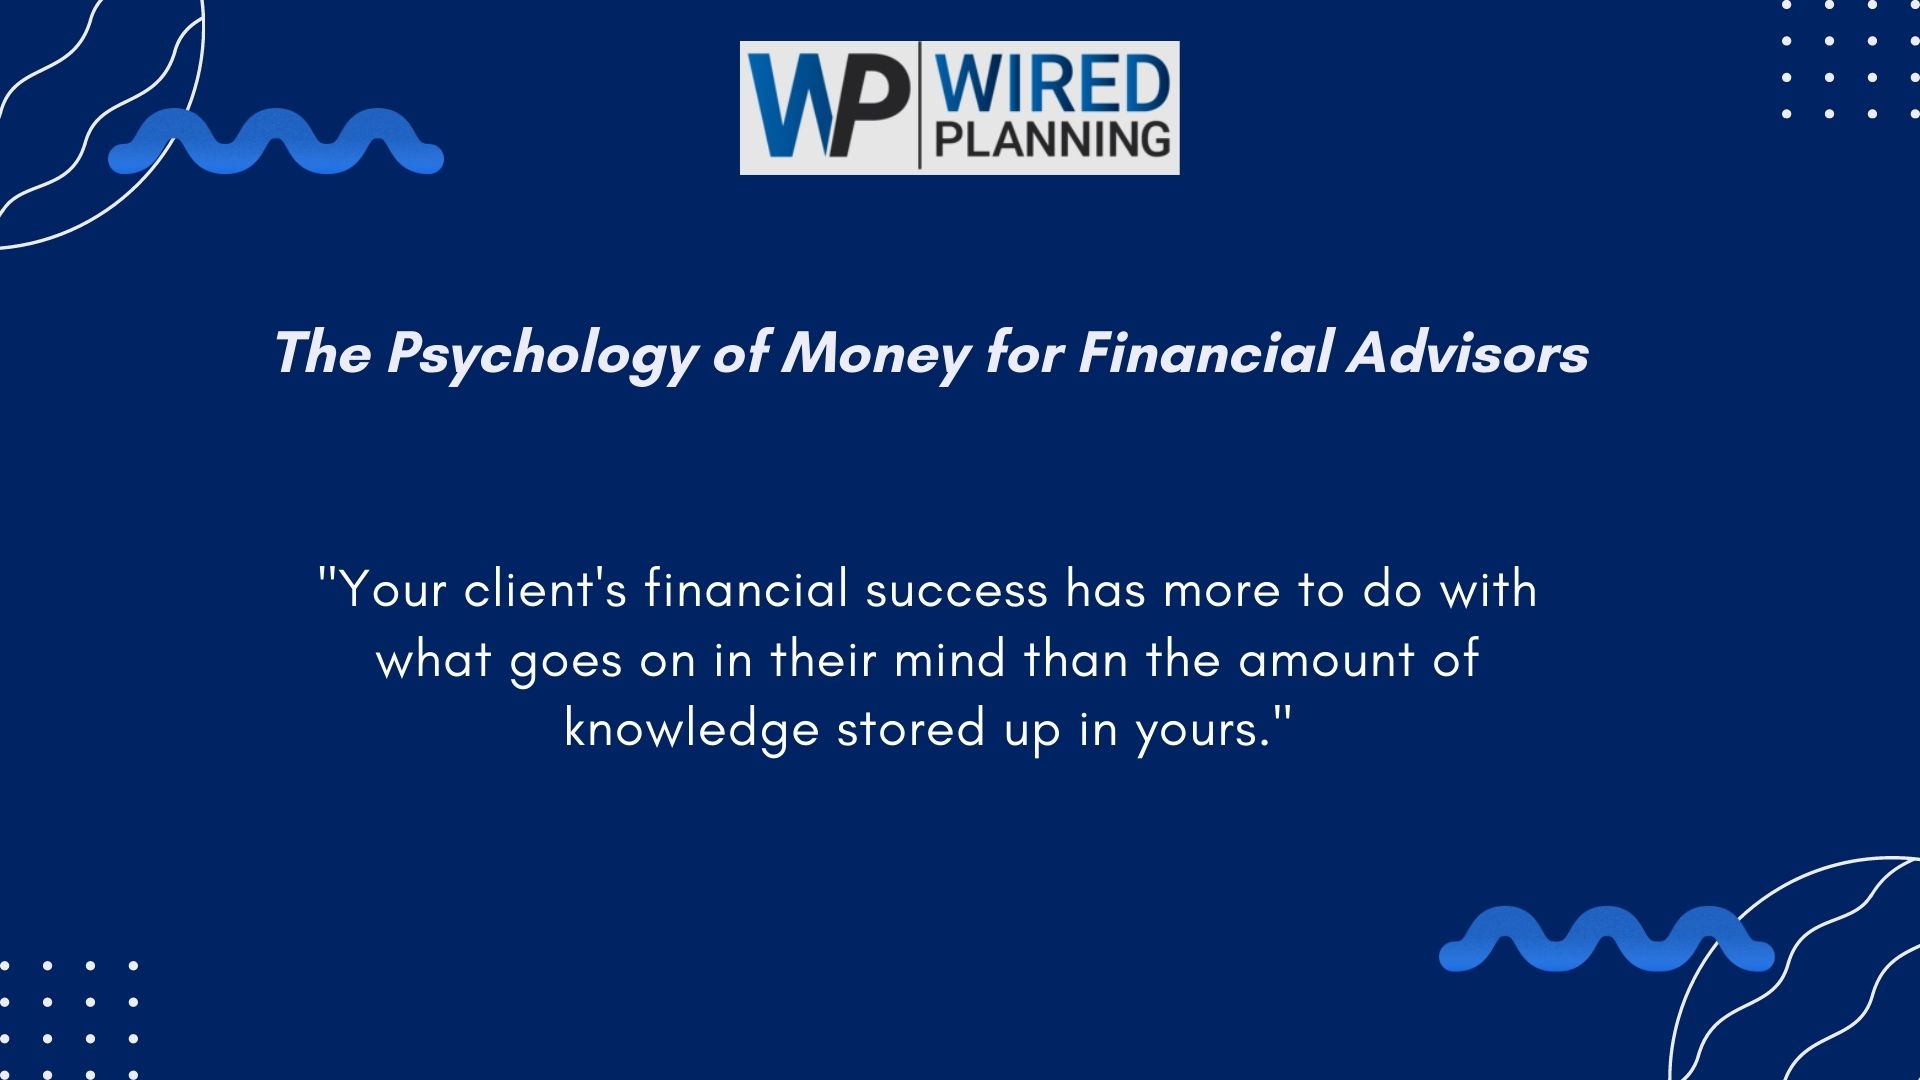 The Psychology of Money for Financial Advisors